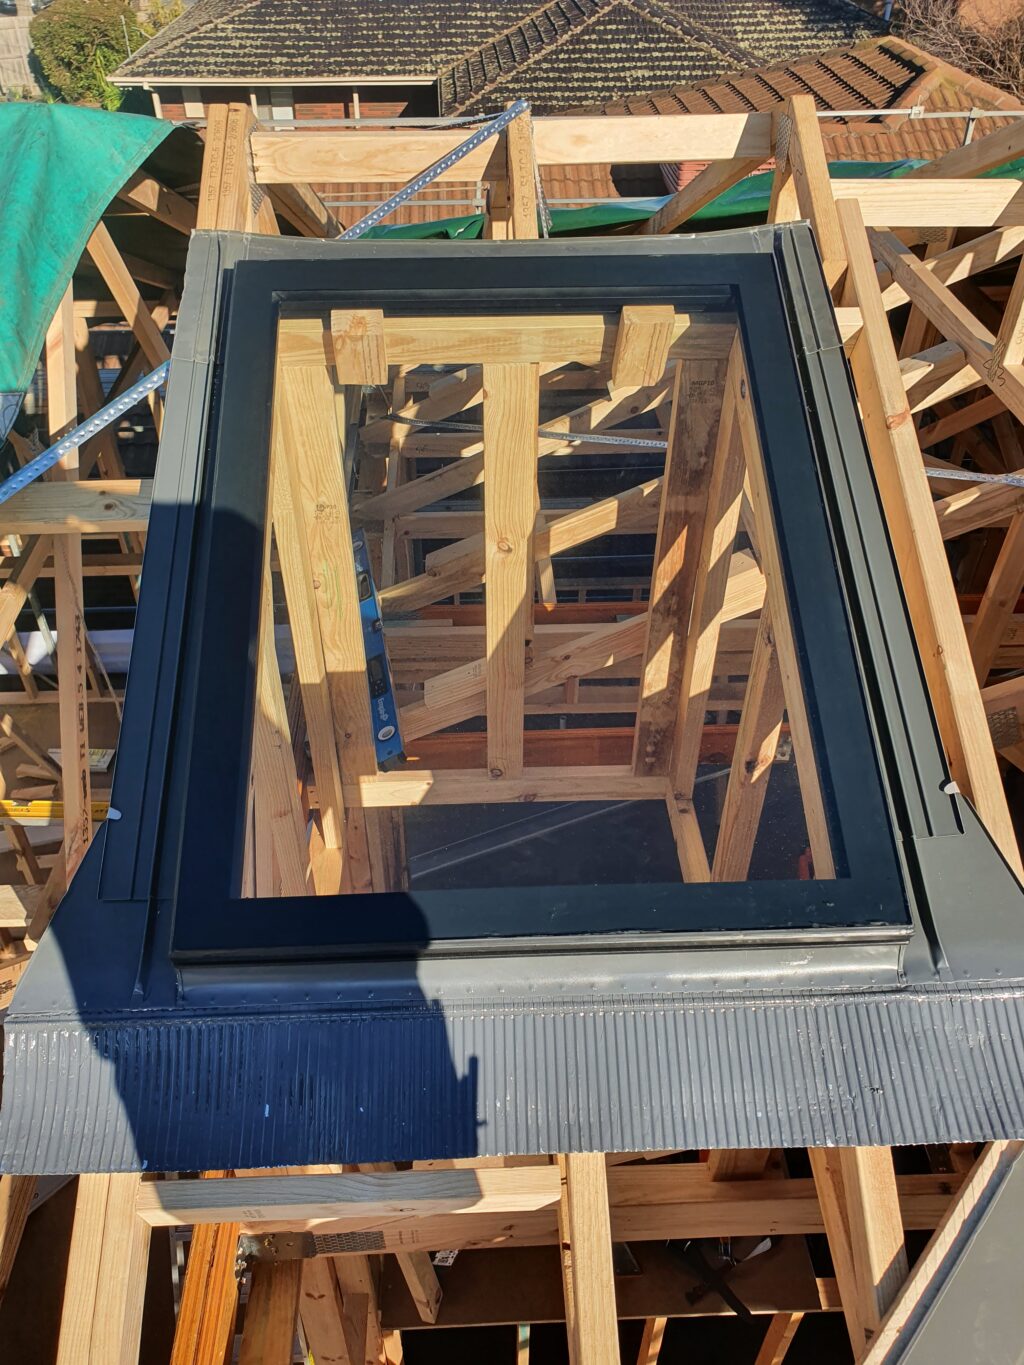 Skylight under construction and roof flashing